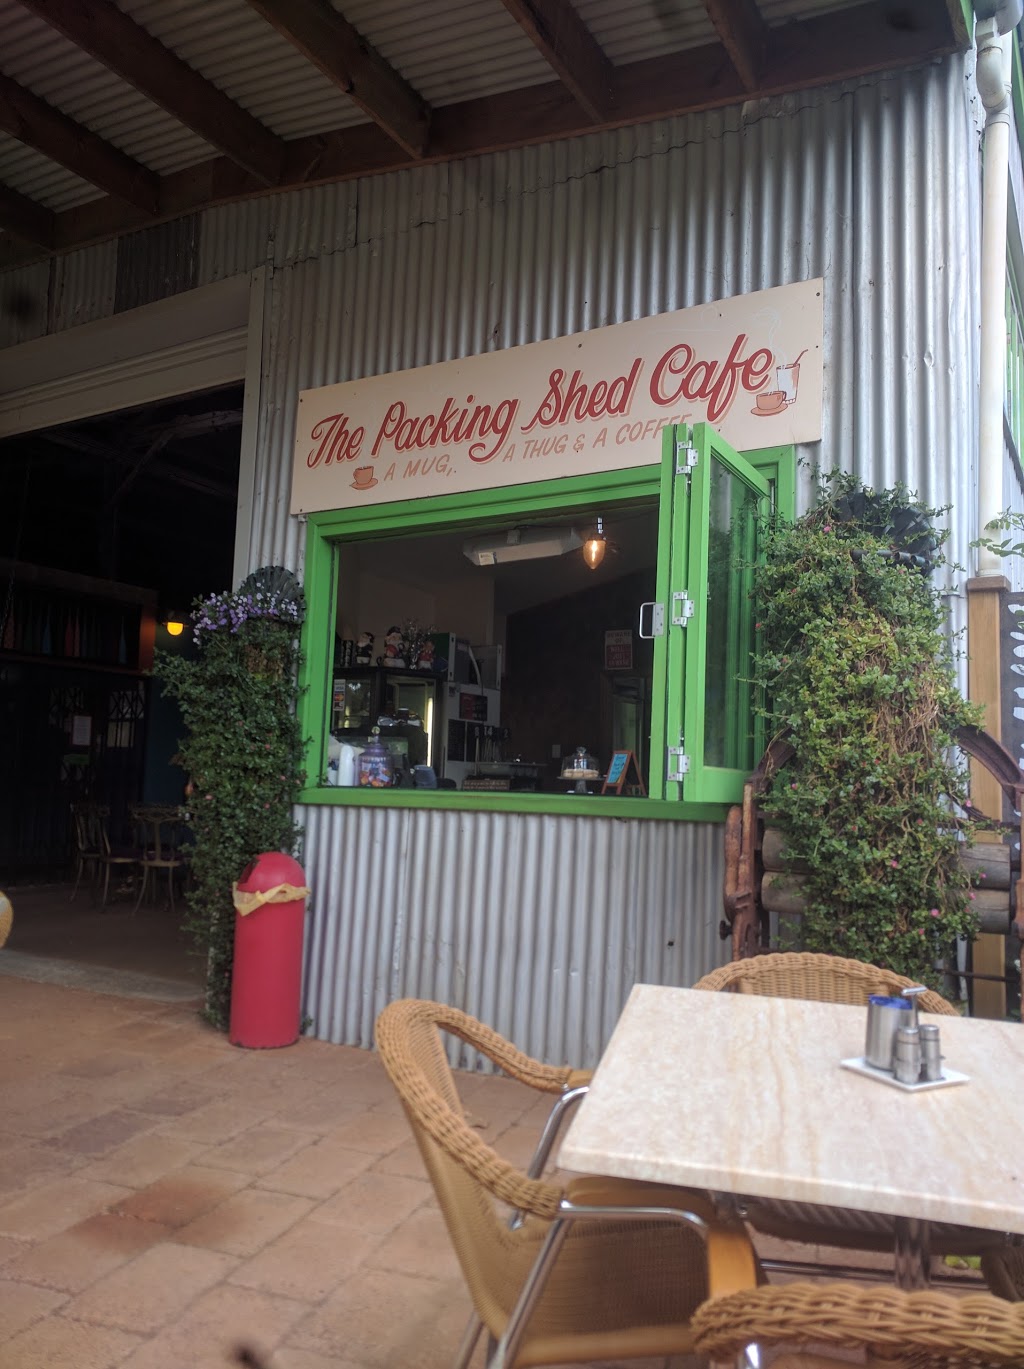 The Olde Shed Cafe | cafe | The Packing Shed South West Hwy, Balingup WA 6253, Australia | 0897641887 OR +61 8 9764 1887